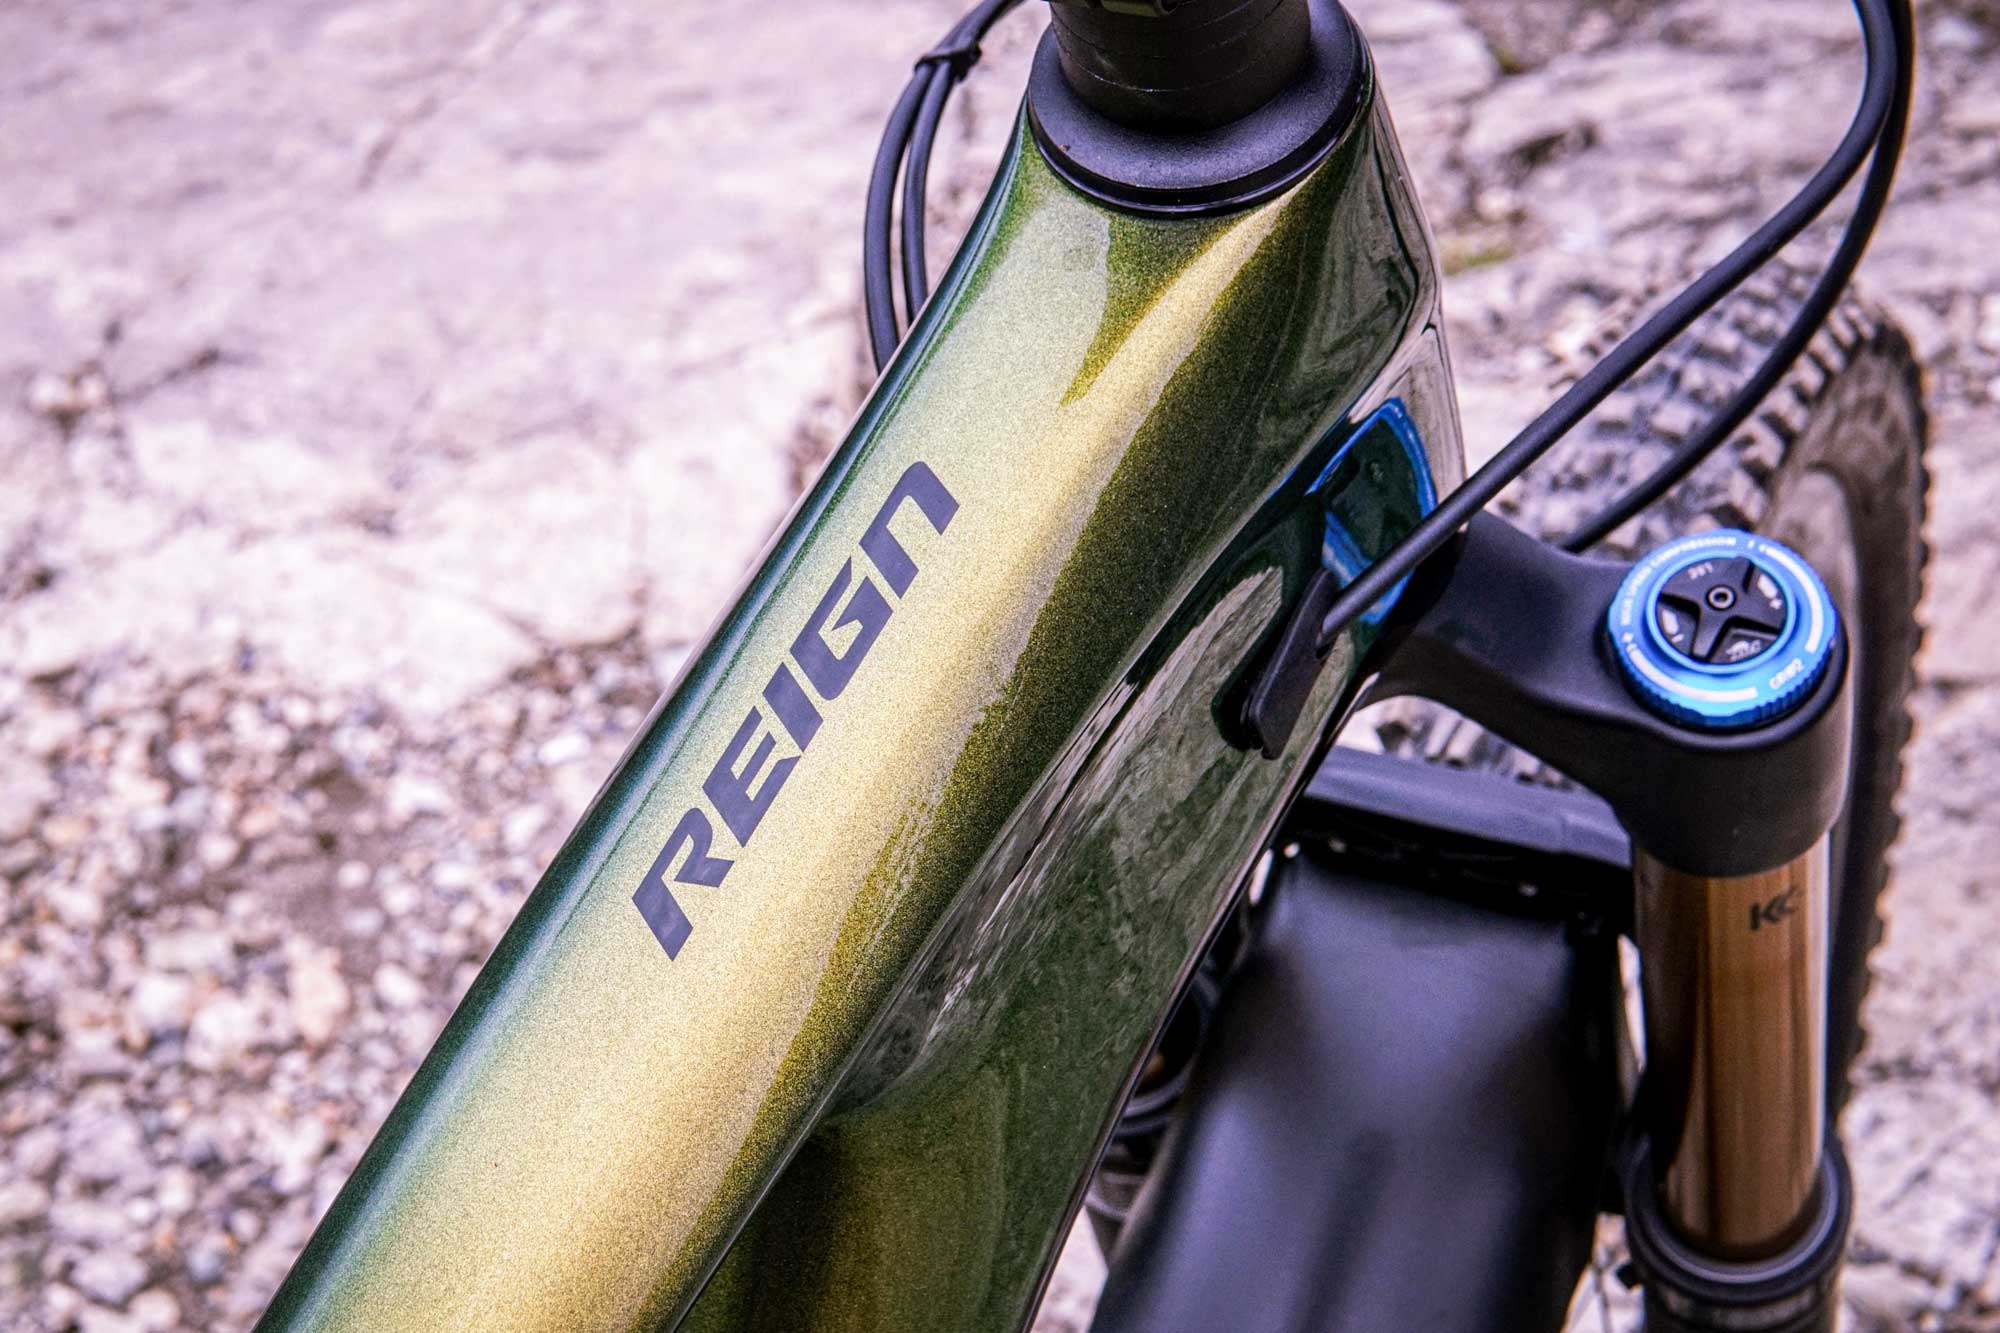 First Ride: Giant Reign Advanced 29 0